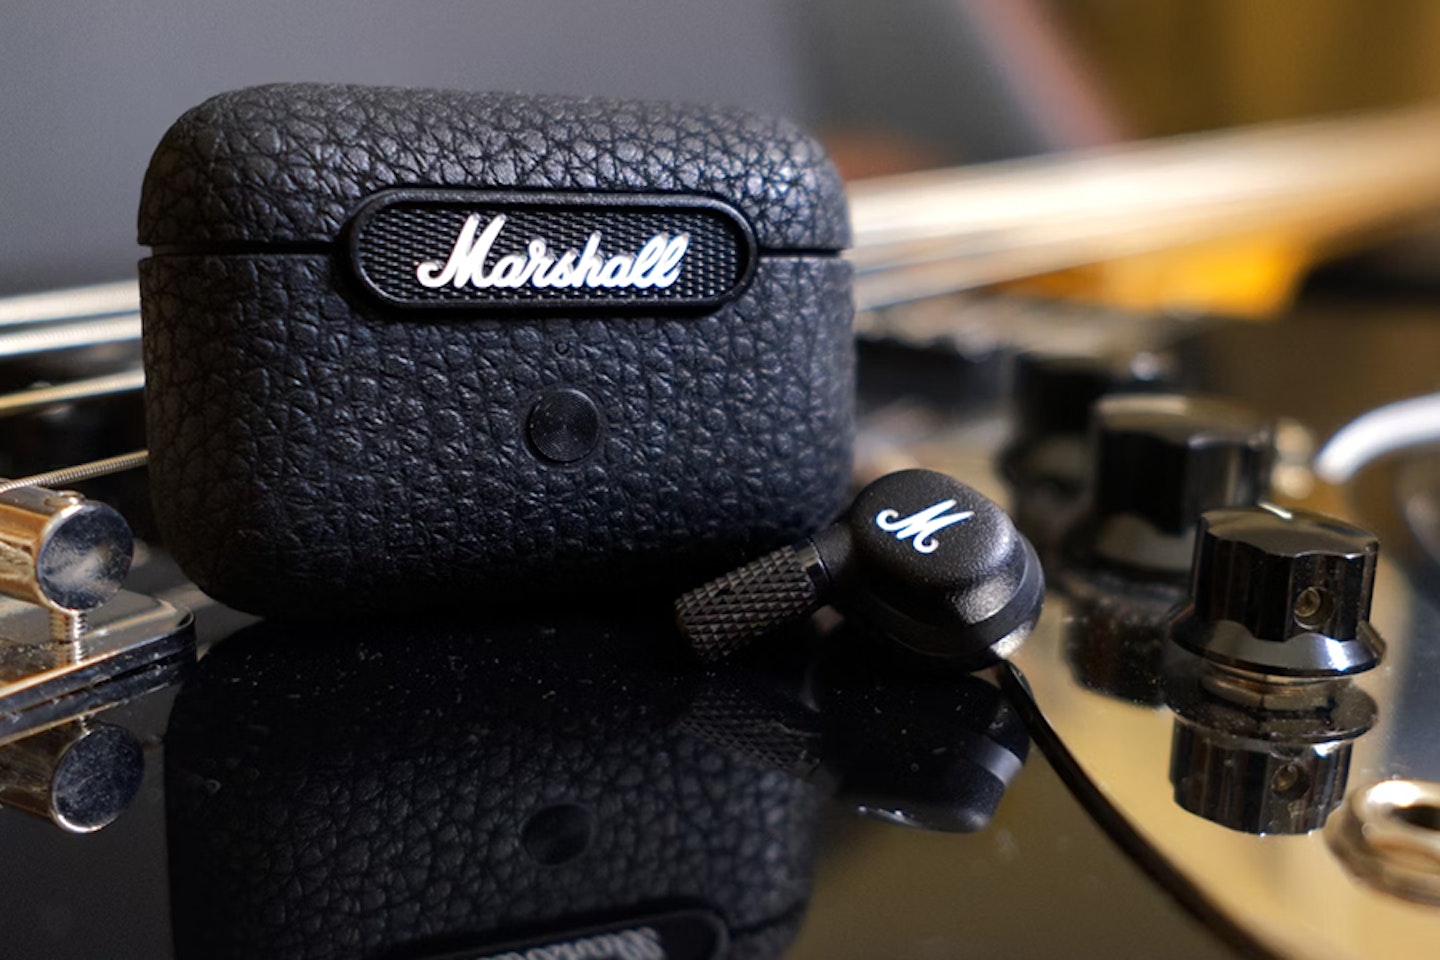 Marshall Motif A.N.C wireless earbuds